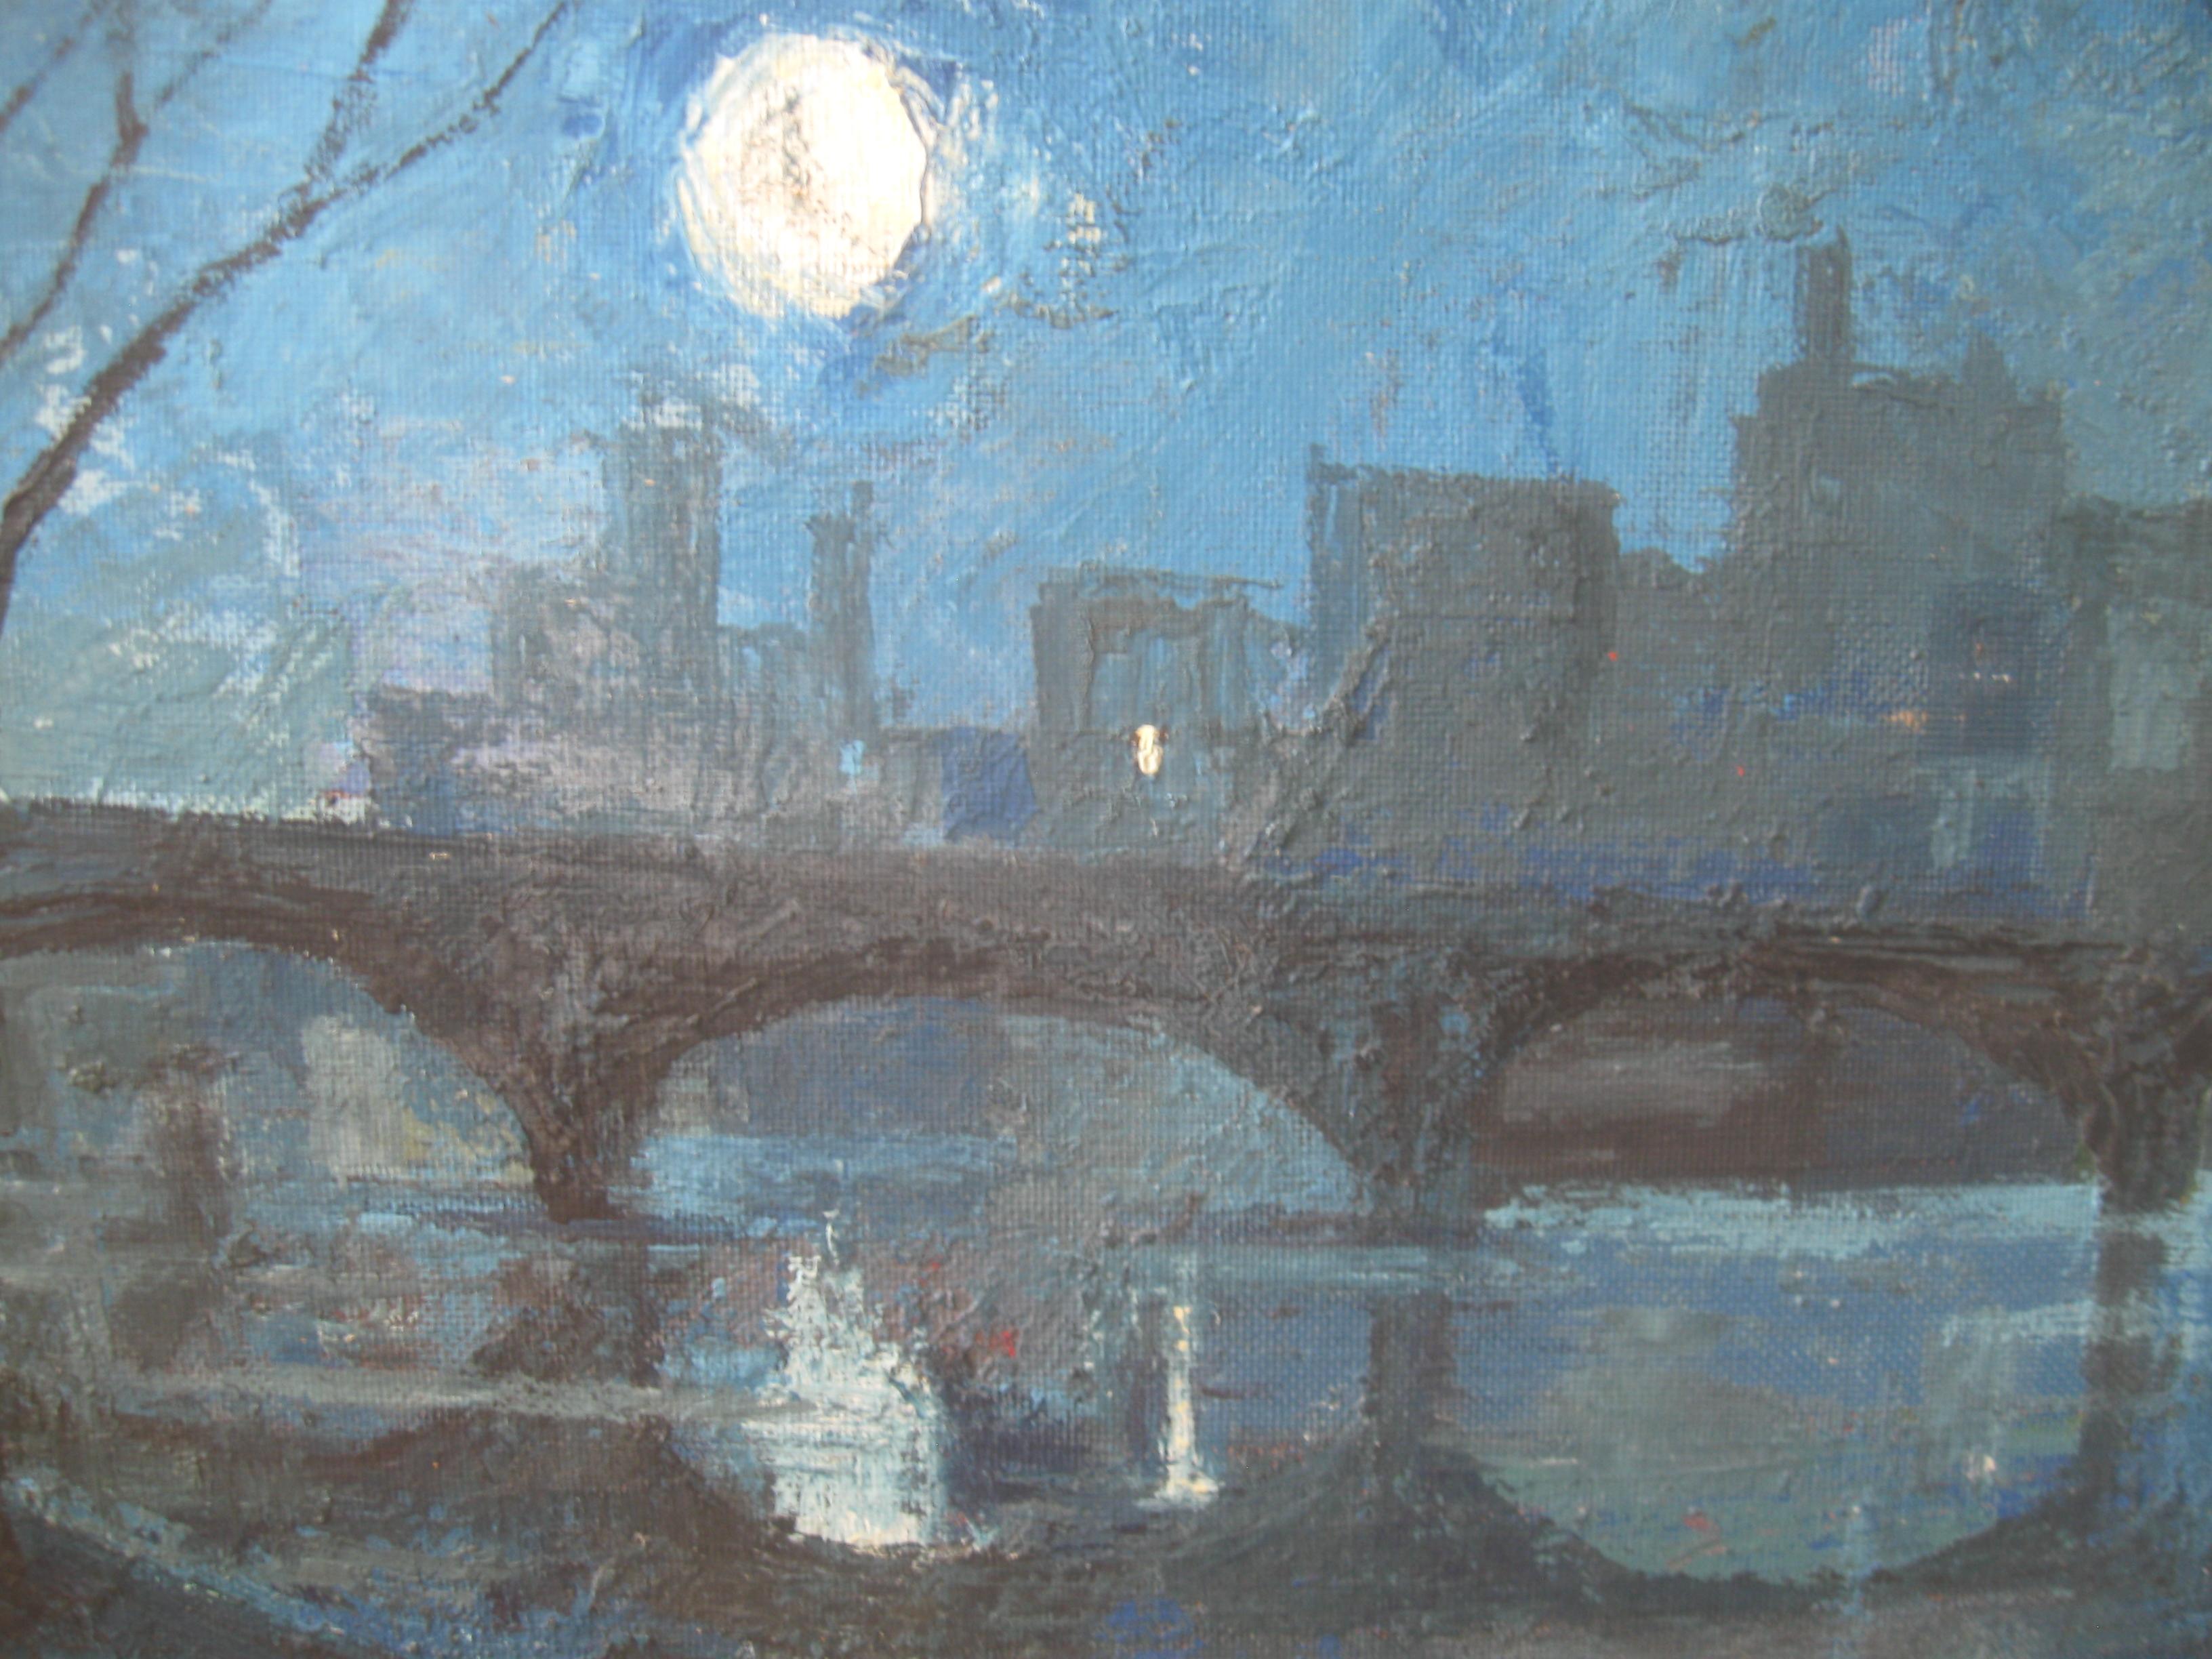 Nocturne, The River Thames, London. Oil on board circa 1950's by Keith Parsons (1919-1988) British. 
painting 42cmx58cm
fine antiques frame 68cmx83cm
Night view with a full moon hanging over the River Thames in central London . Silohetted bridges